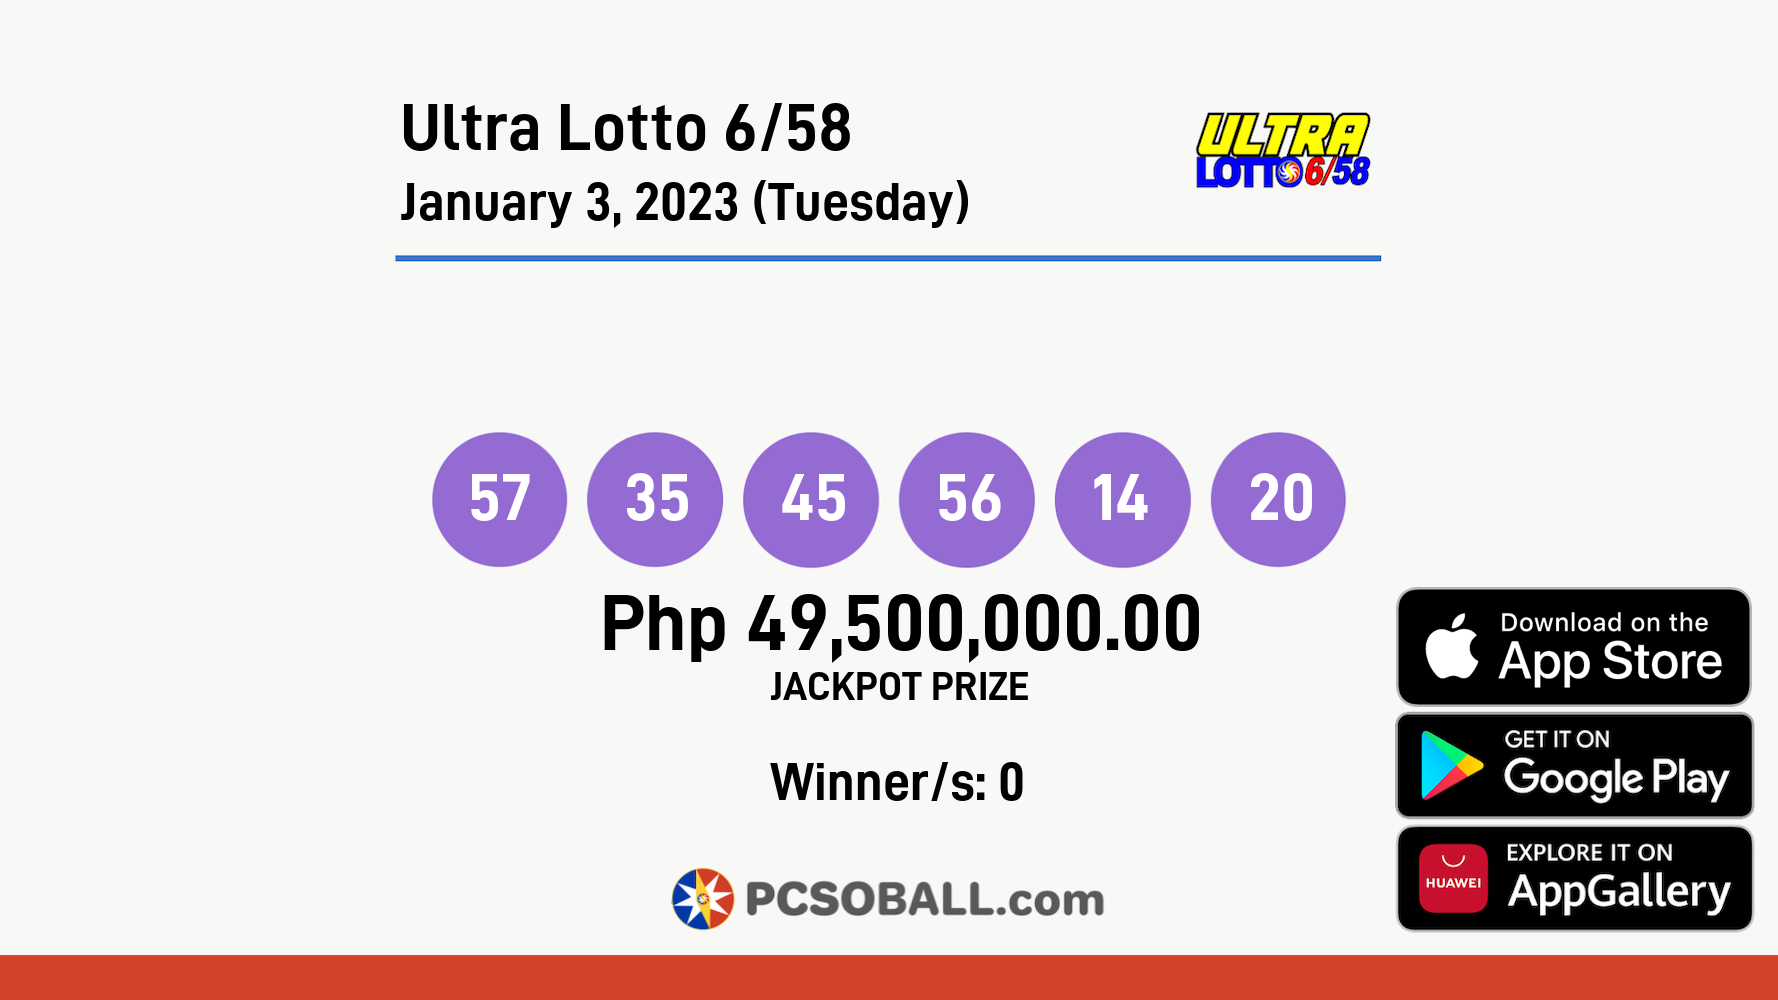 Ultra Lotto 6/58 January 3, 2023 (Tuesday) Result